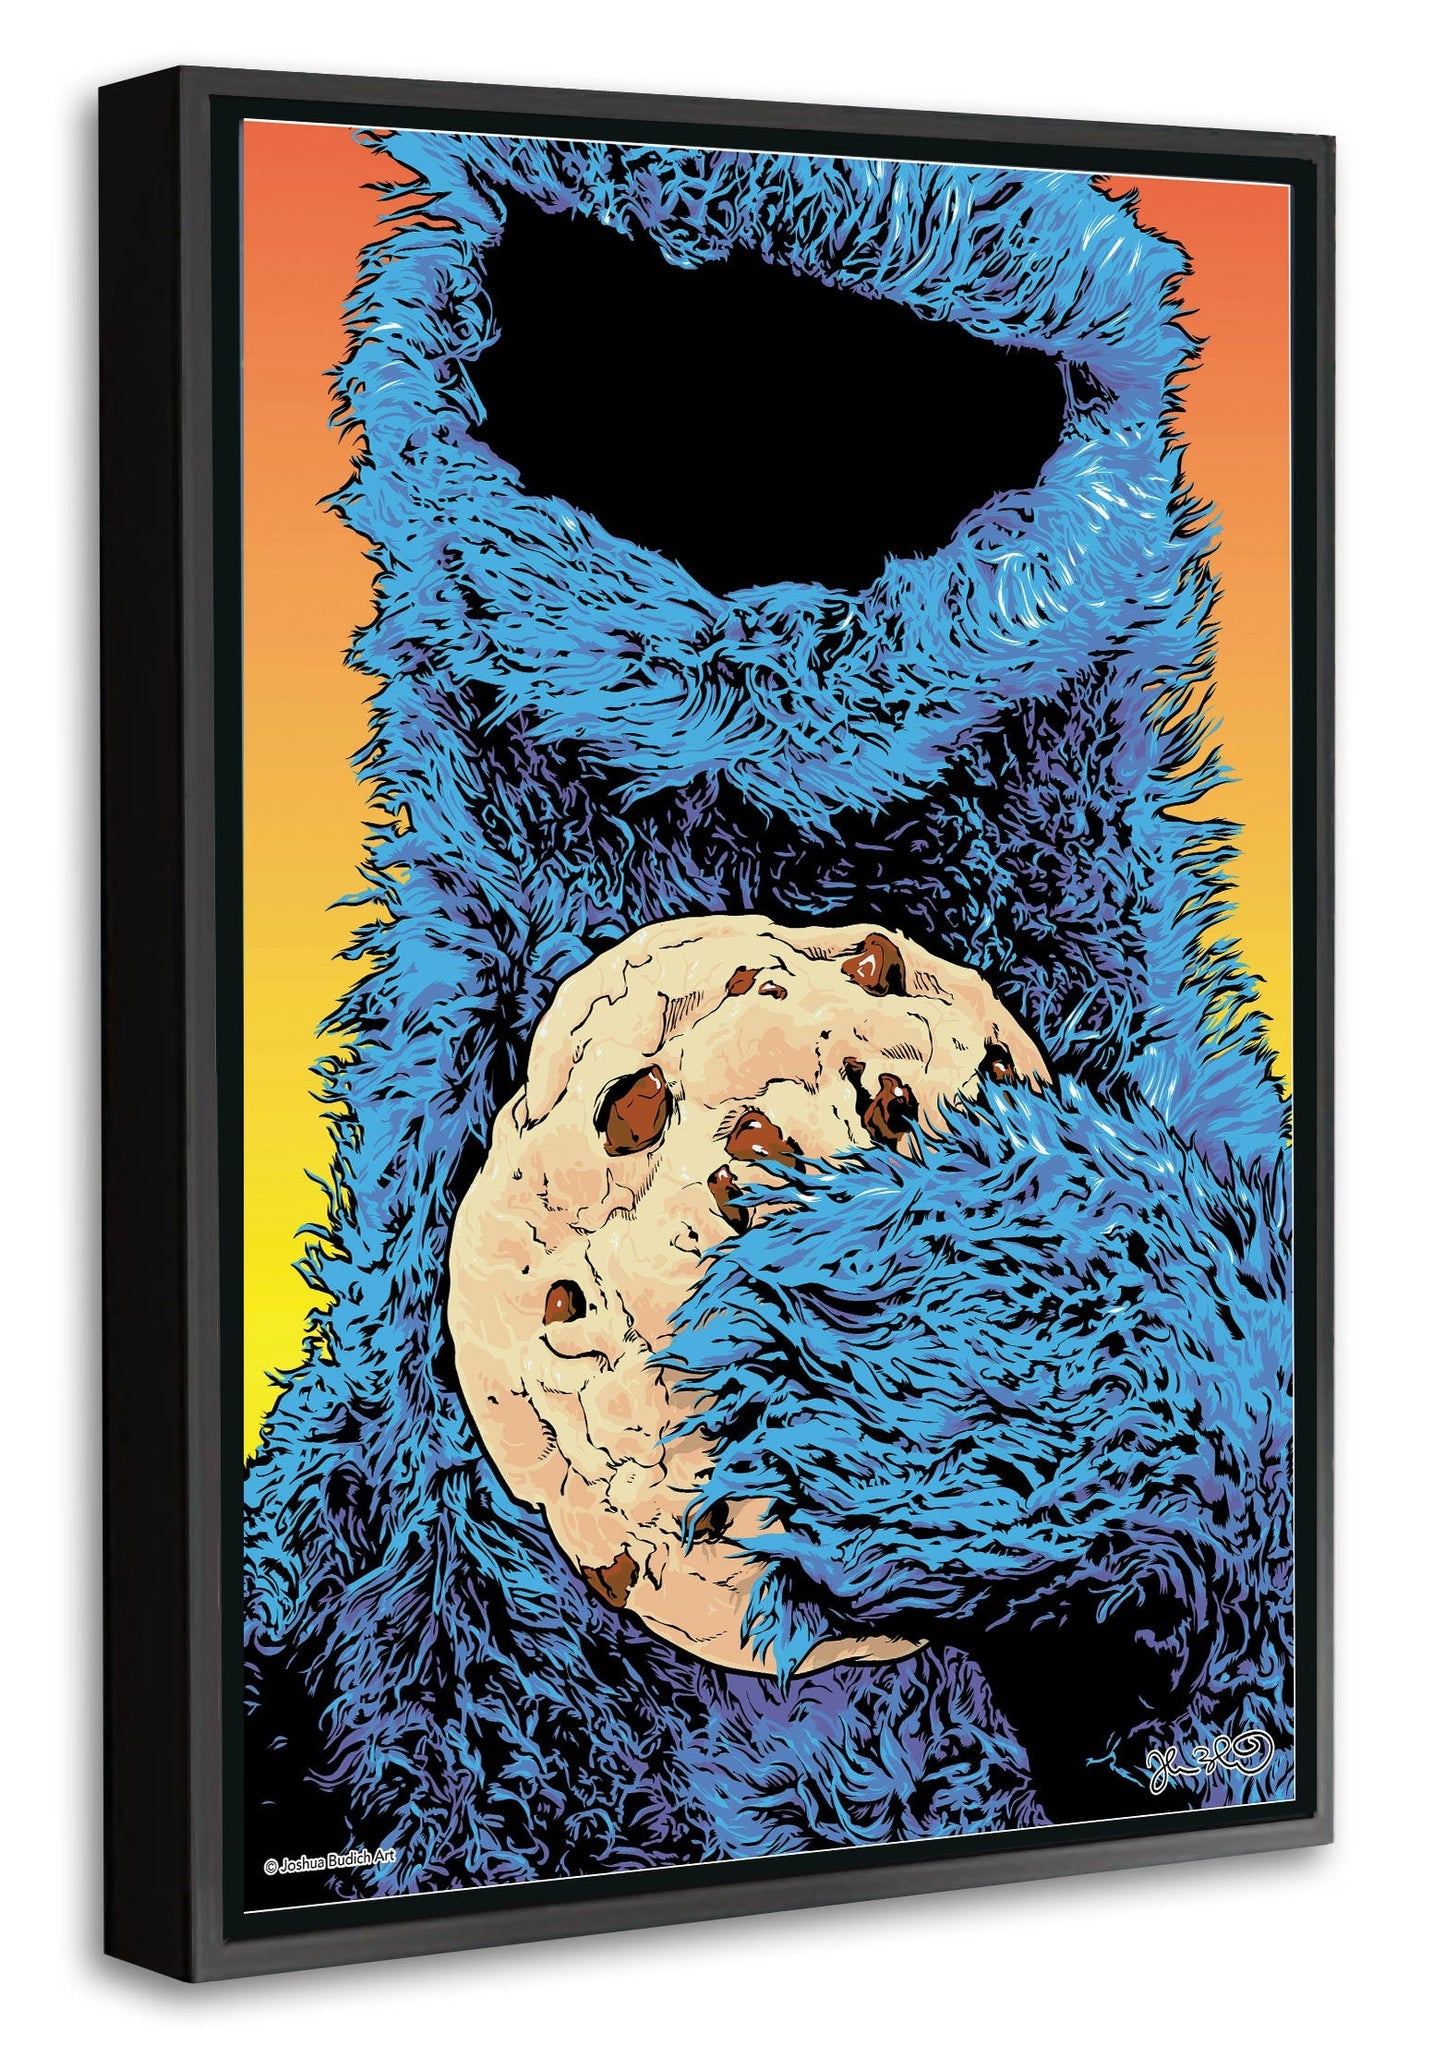 Cookie Monster-joshua-budich, print-Canvas Print with Box Frame-40 x 60 cm-BLUE SHAKER